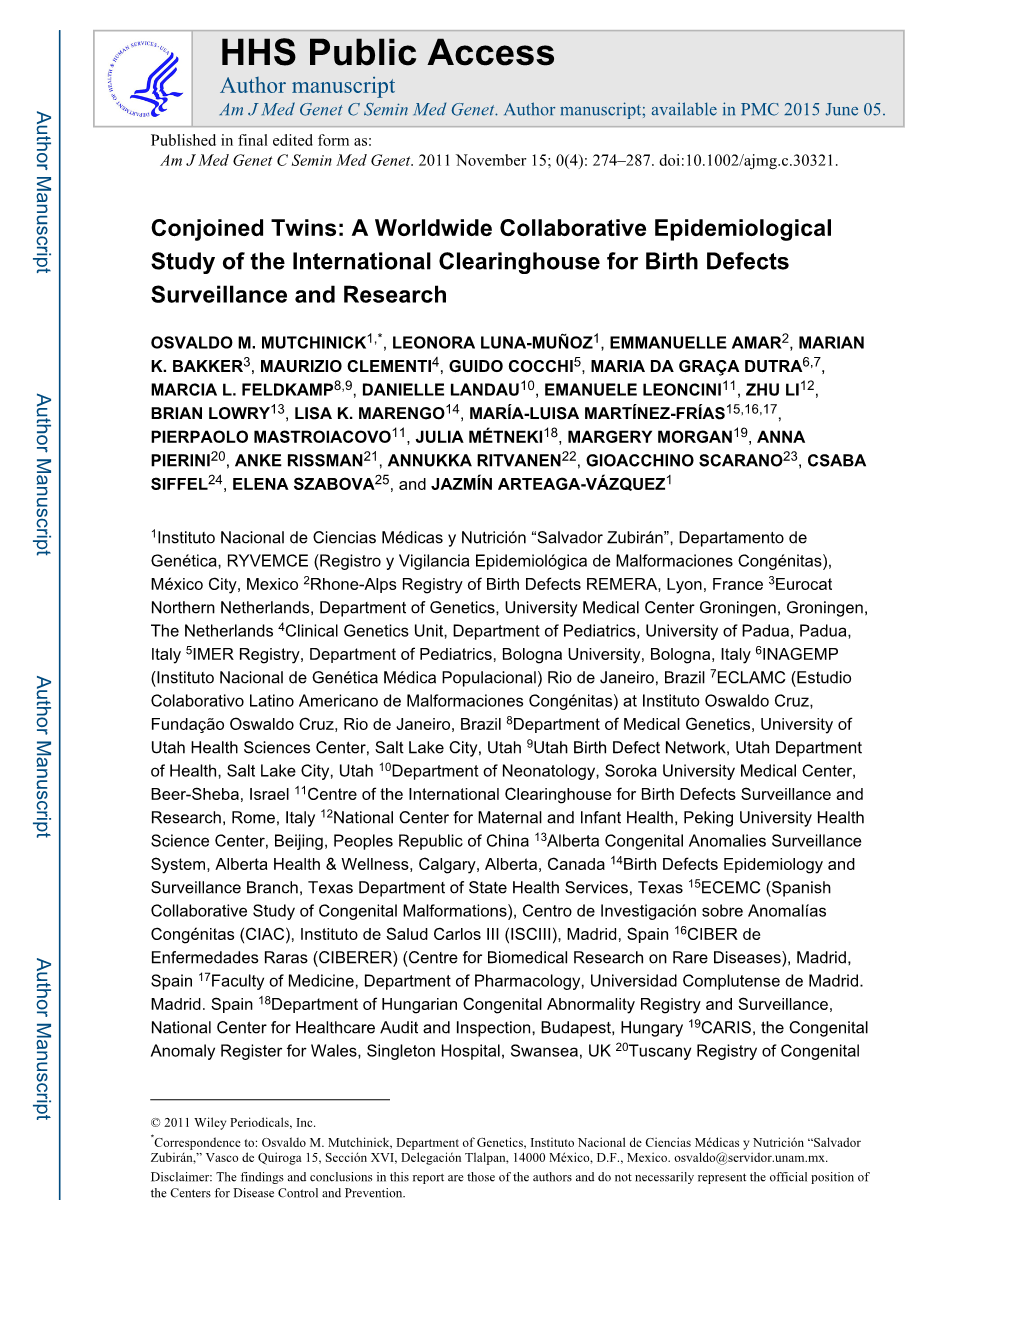 Conjoined Twins: a Worldwide Collaborative Epidemiological Study of the International Clearinghouse for Birth Defects Surveillance and Research